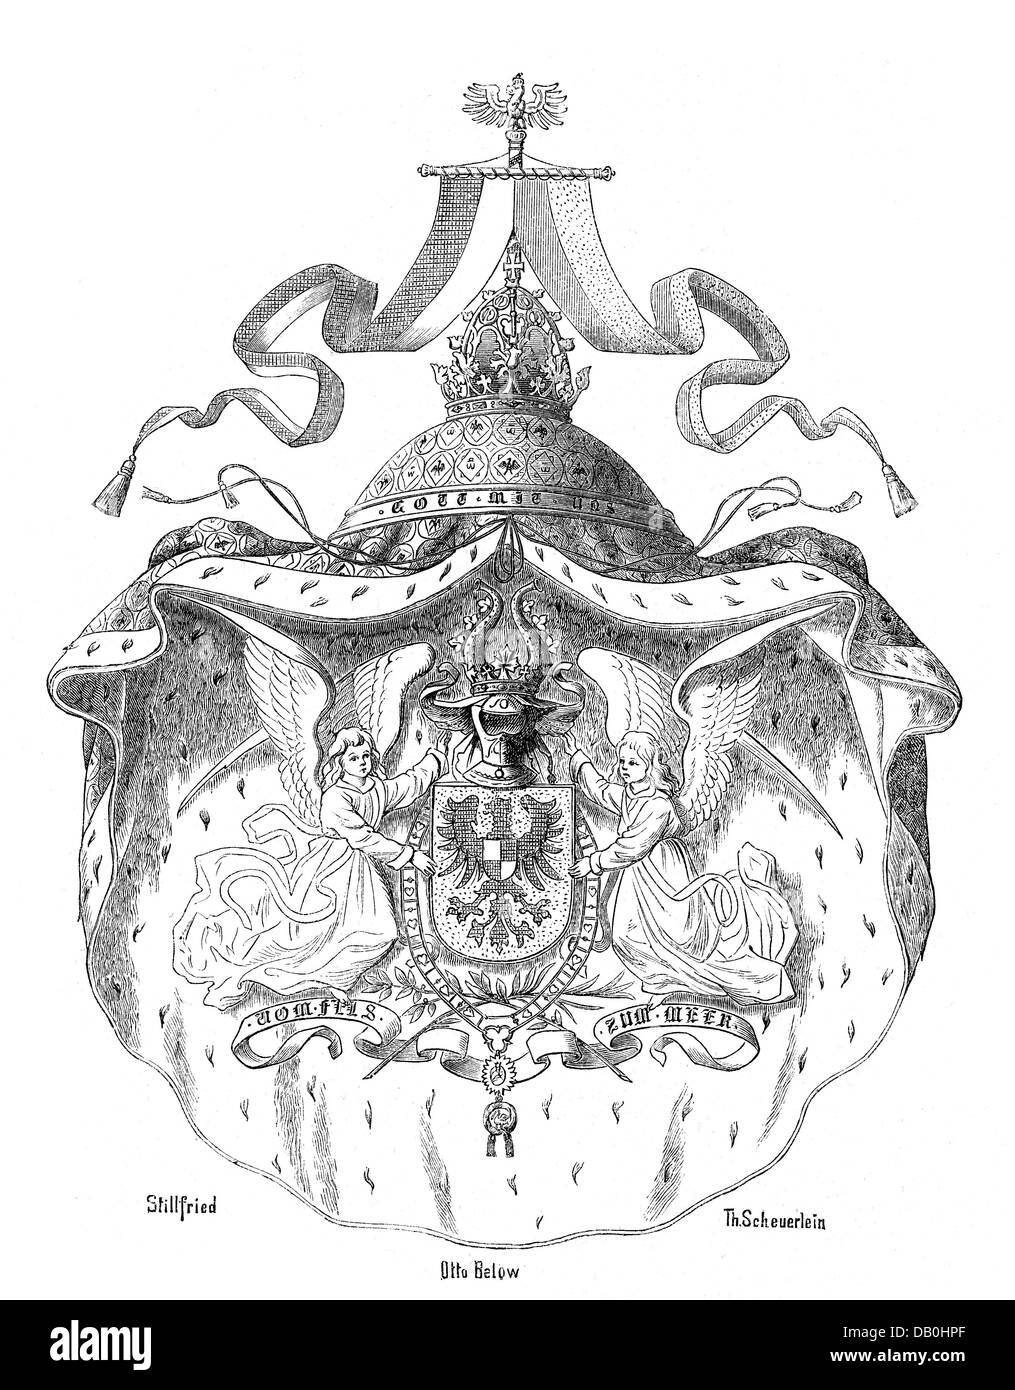 heraldry, coat of arms, Germany, great coat of arms of the German Emperor, layout, wood engraving, circa 1872, Additional-Rights-Clearences-Not Available Stock Photo